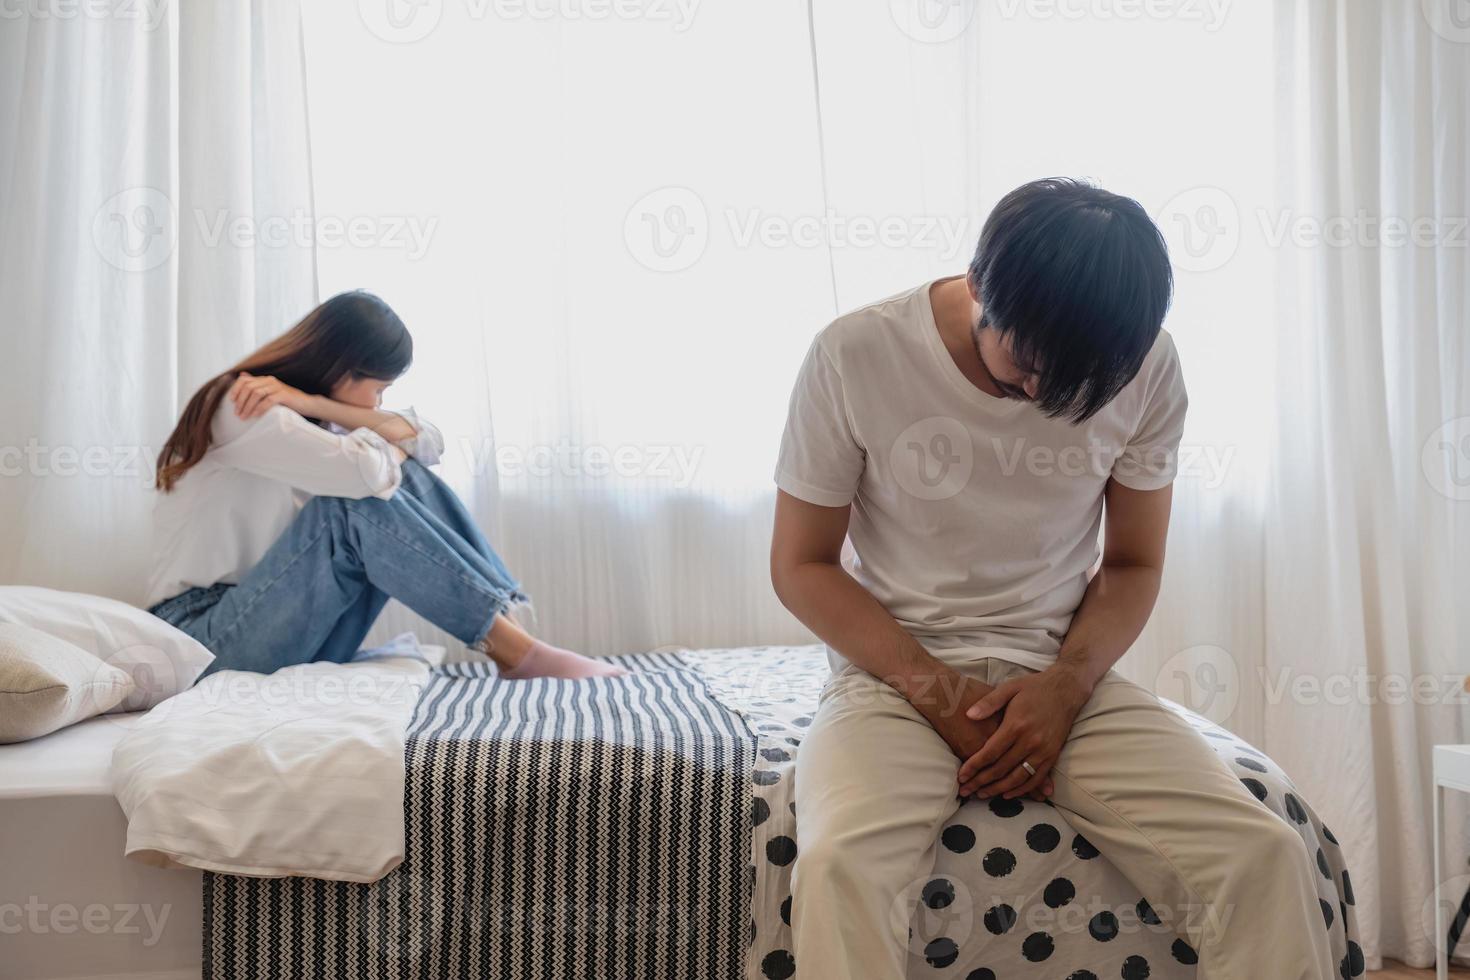 The husband is unhappy and disappointed in the erectile dysfunction during sex while his wife sleeping on the image